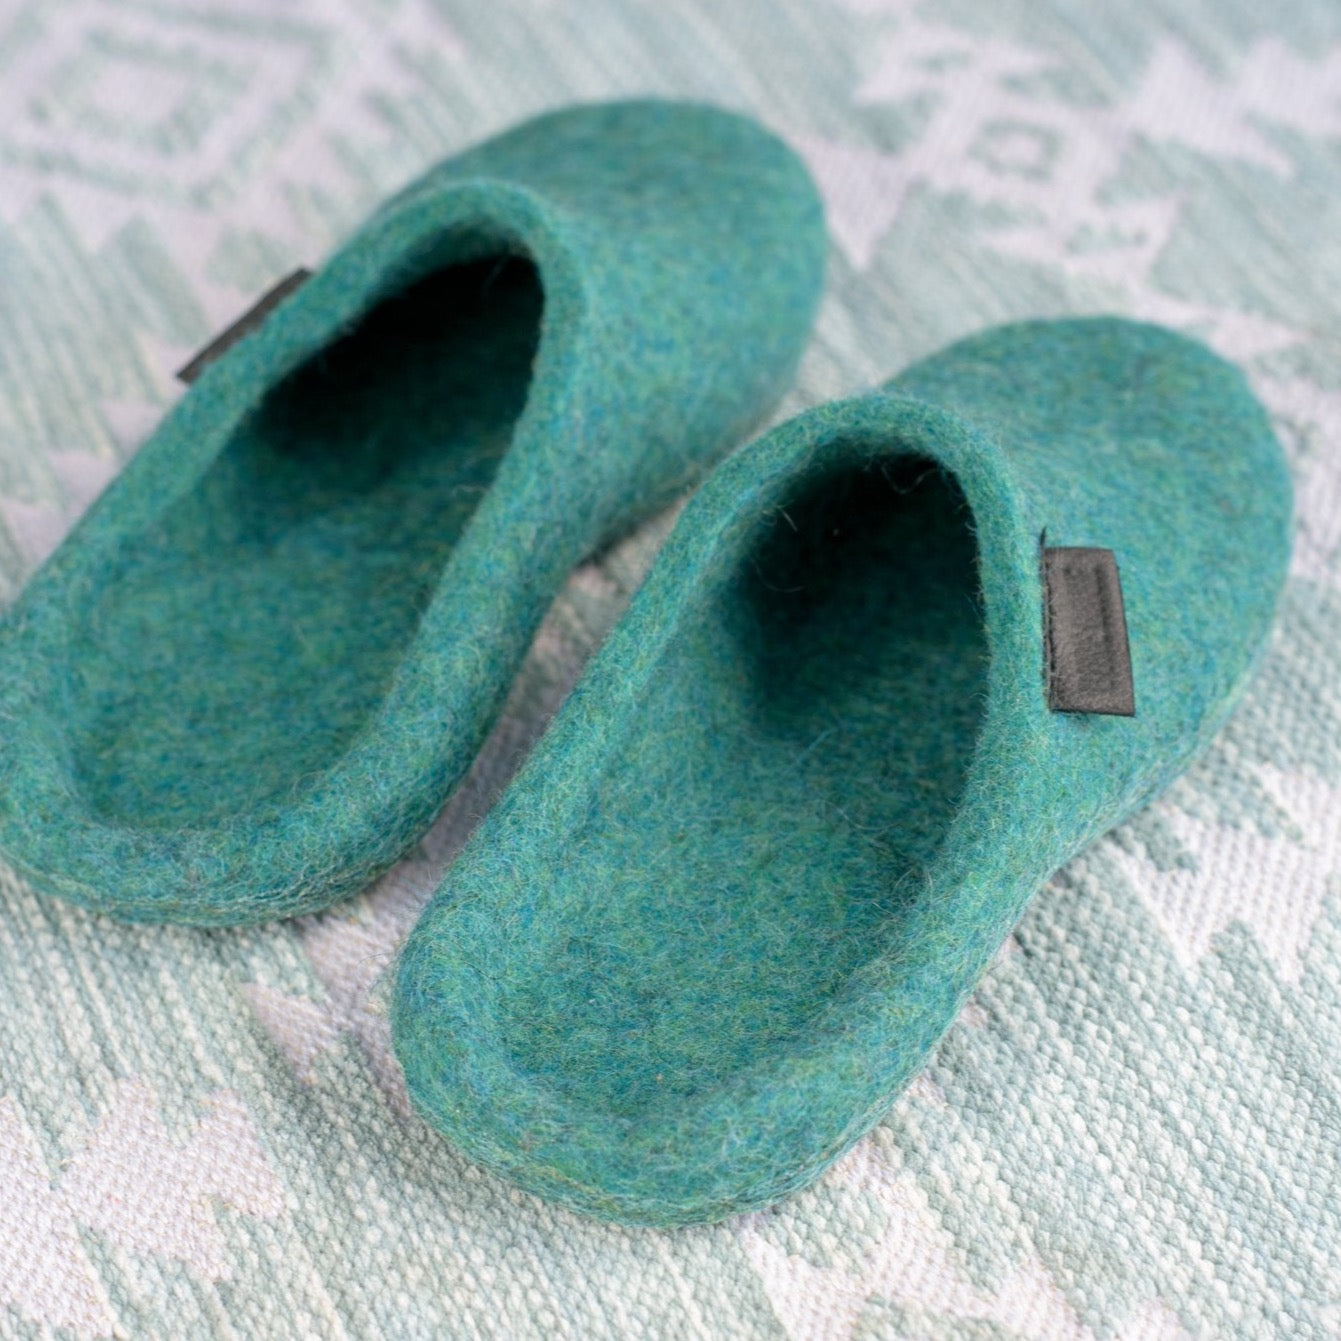 Felted Slide Slippers for Her with nonslippery latex soles